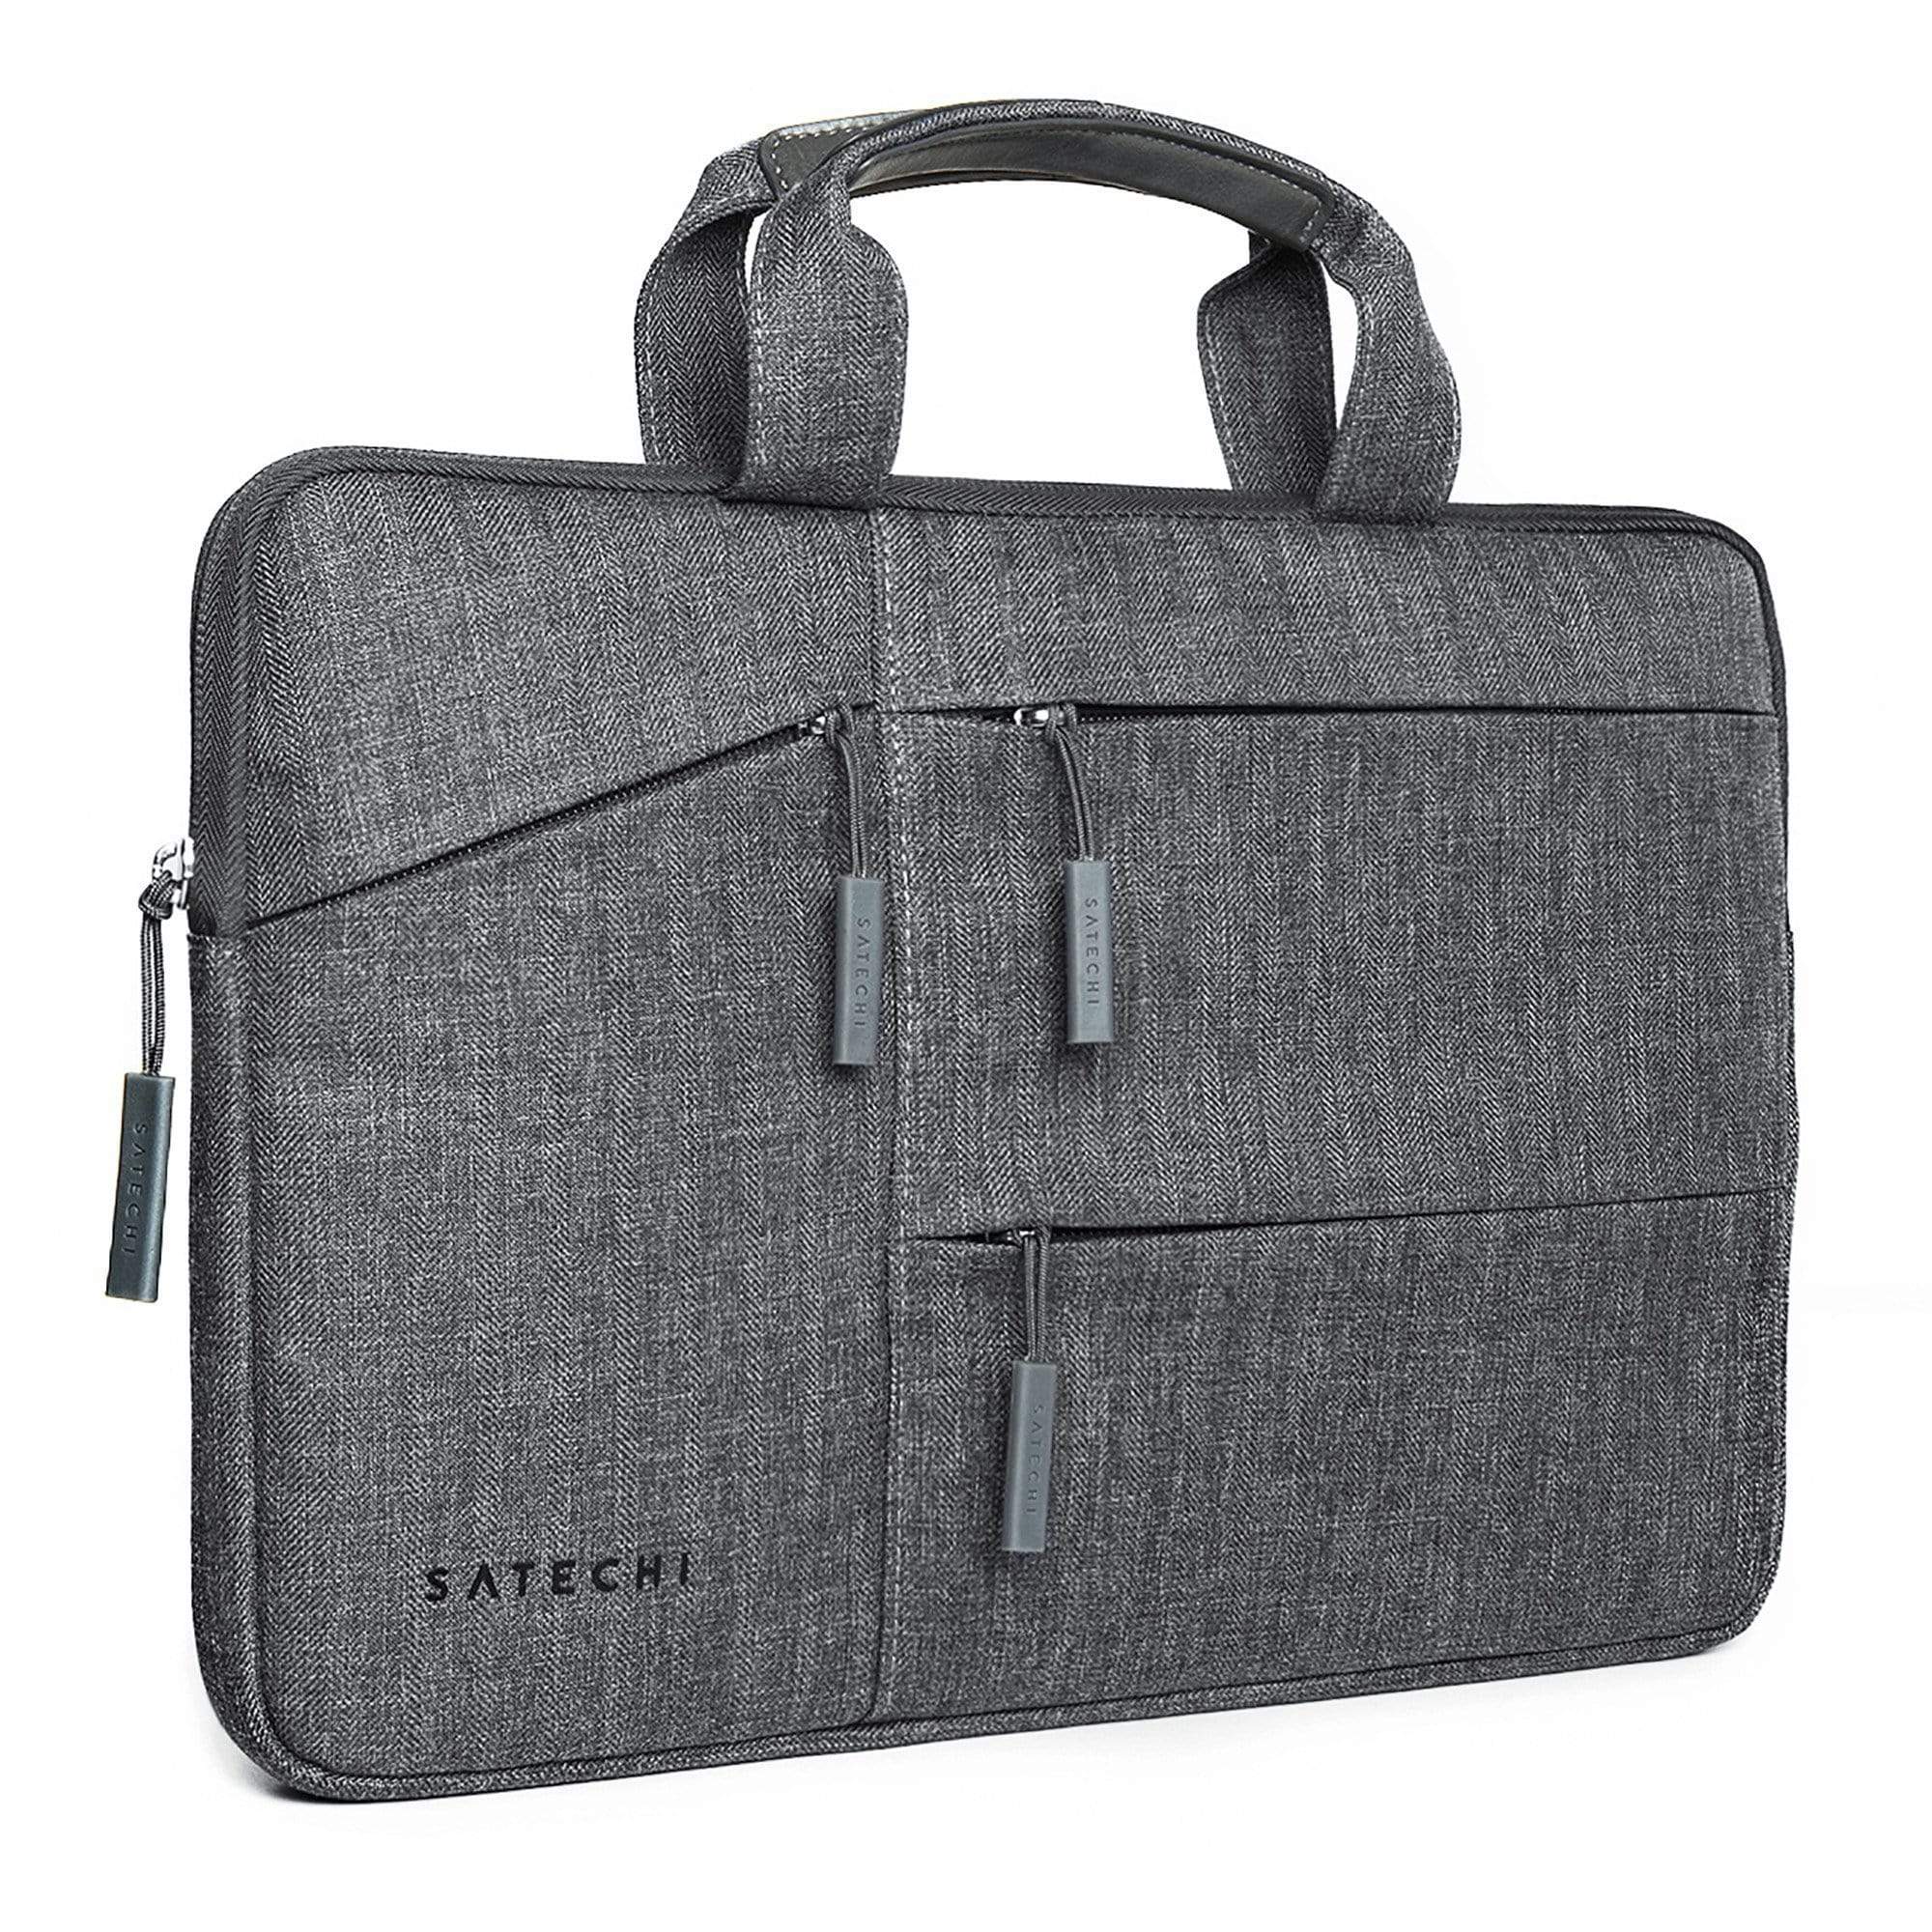 Water-Resistant Laptop Carrying Case with Pockets Other Satechi 13-Inch